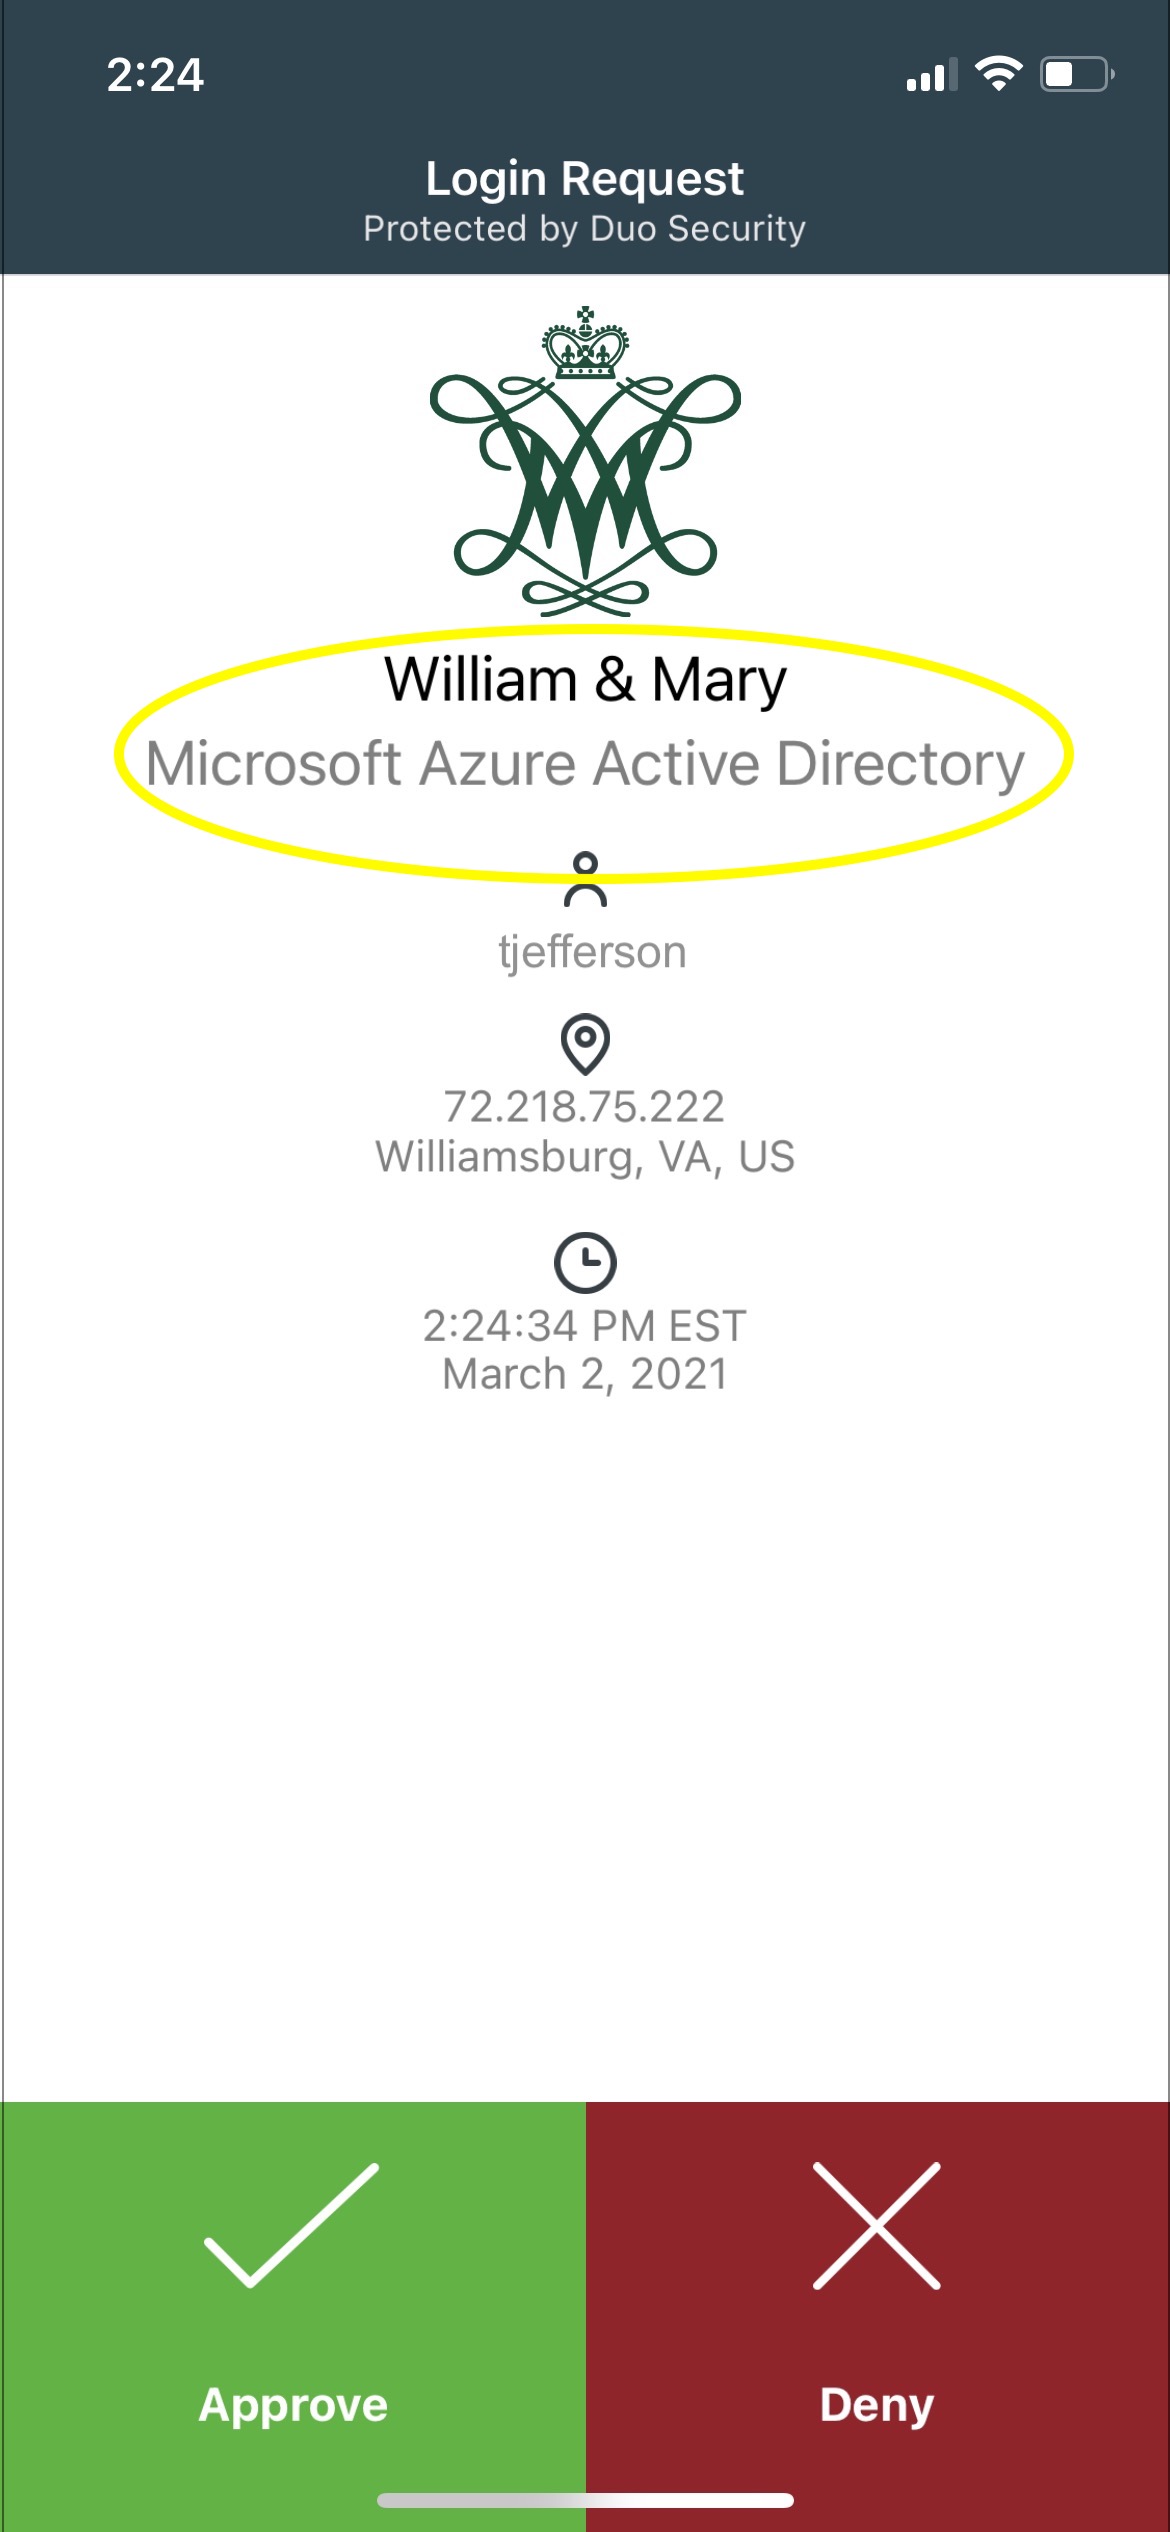 The Duo push comes from "Microsoft Azure Active Directory"